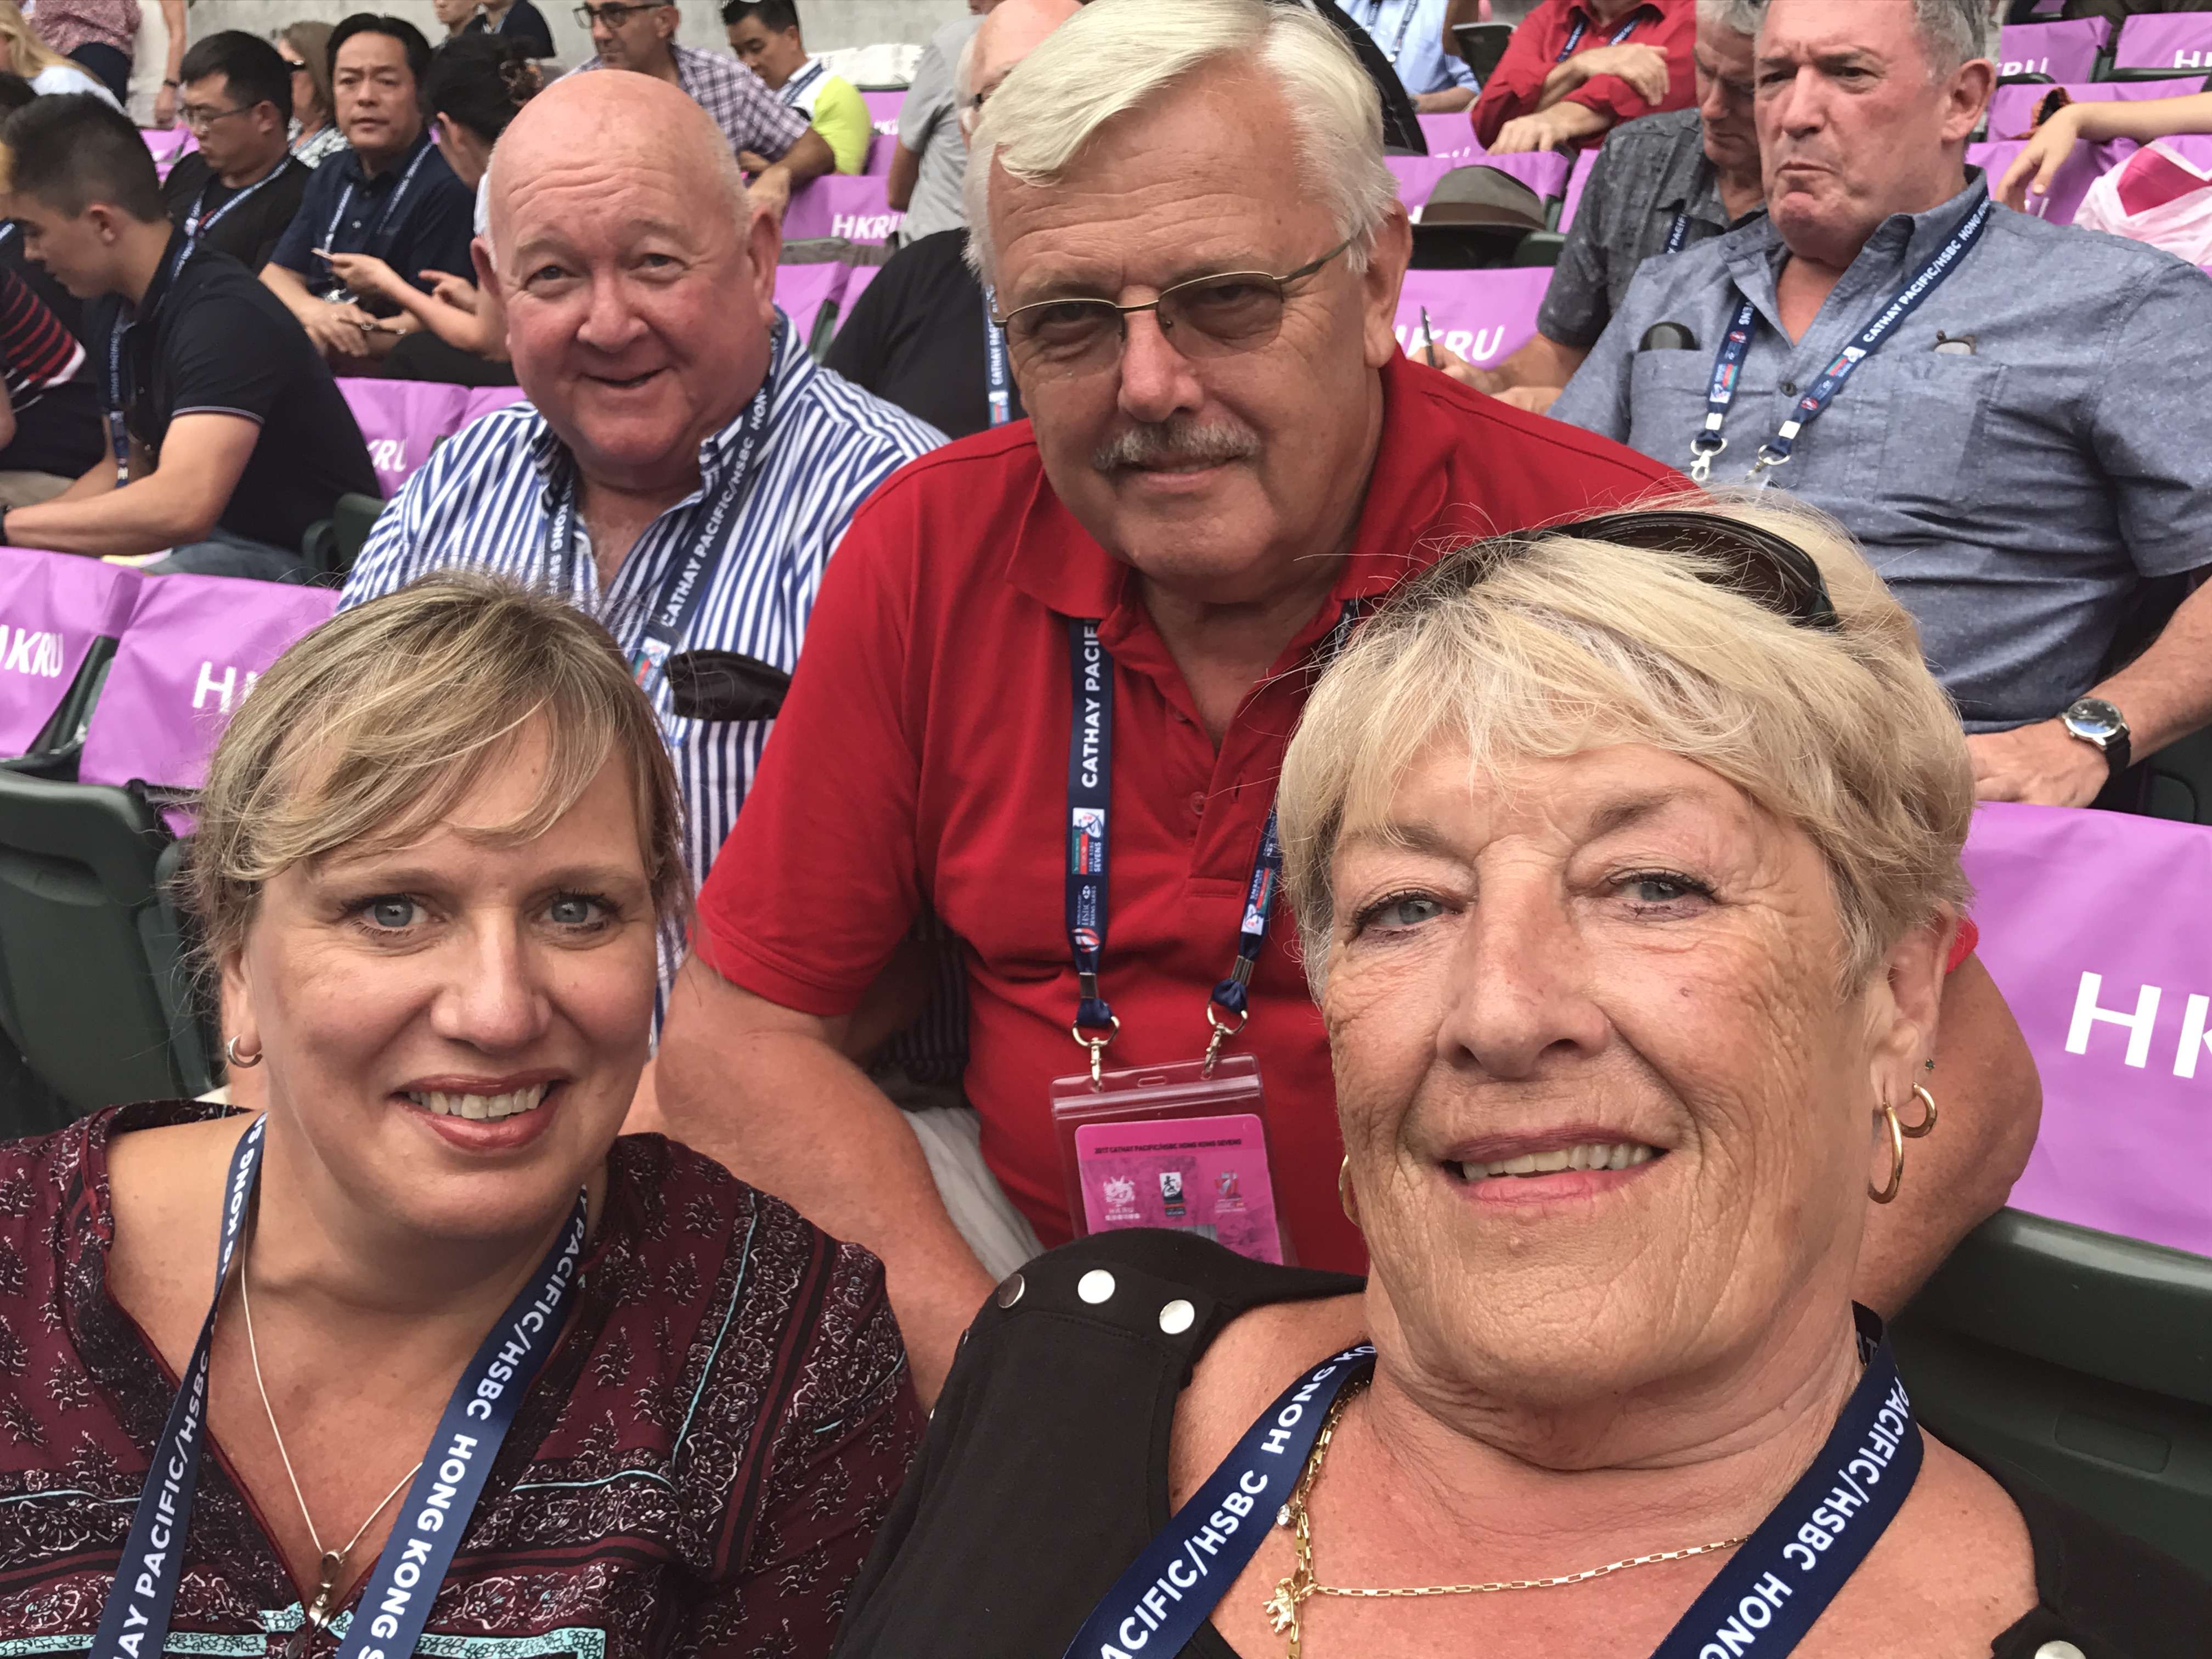 Brian Whittingham (top left), Peter Burbidge-King, Sue Van Wyk and Christine Burbidge-King at the 2017 Cathay Pacific/Hong Kong sevens . This year with the right tickets in the right week. Photos: Handout